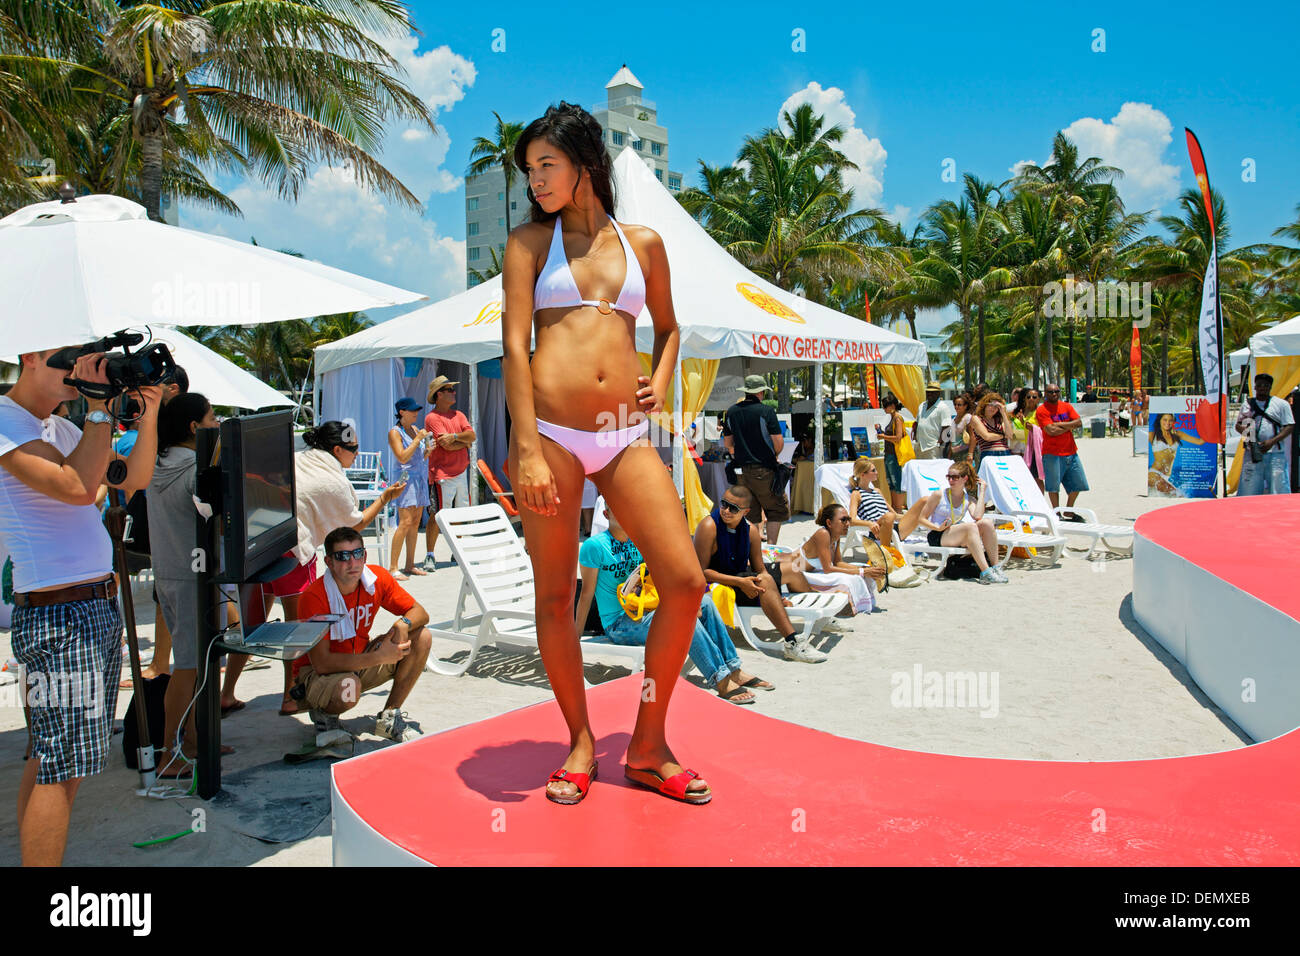 Bikini contest hi-res stock photography and images picture